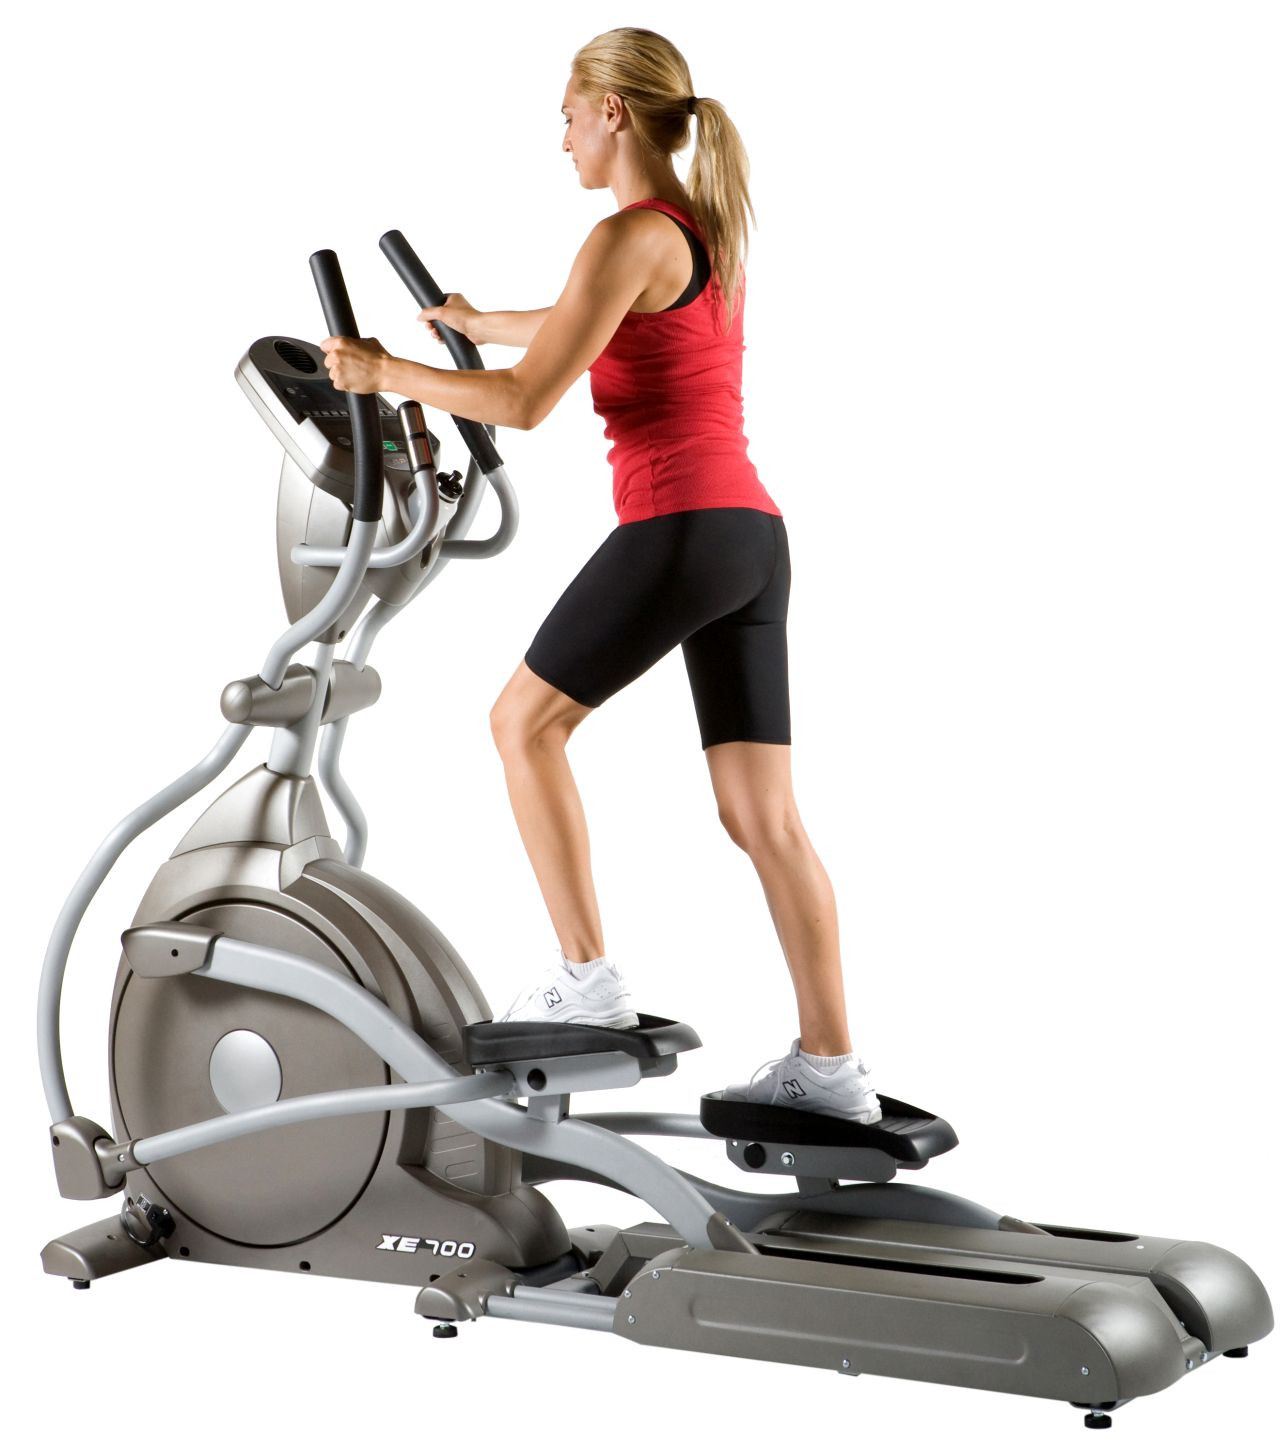 Weight Loss Exercises Gym Machines
 Best Exercises for Weight Loss at Home planet fitness